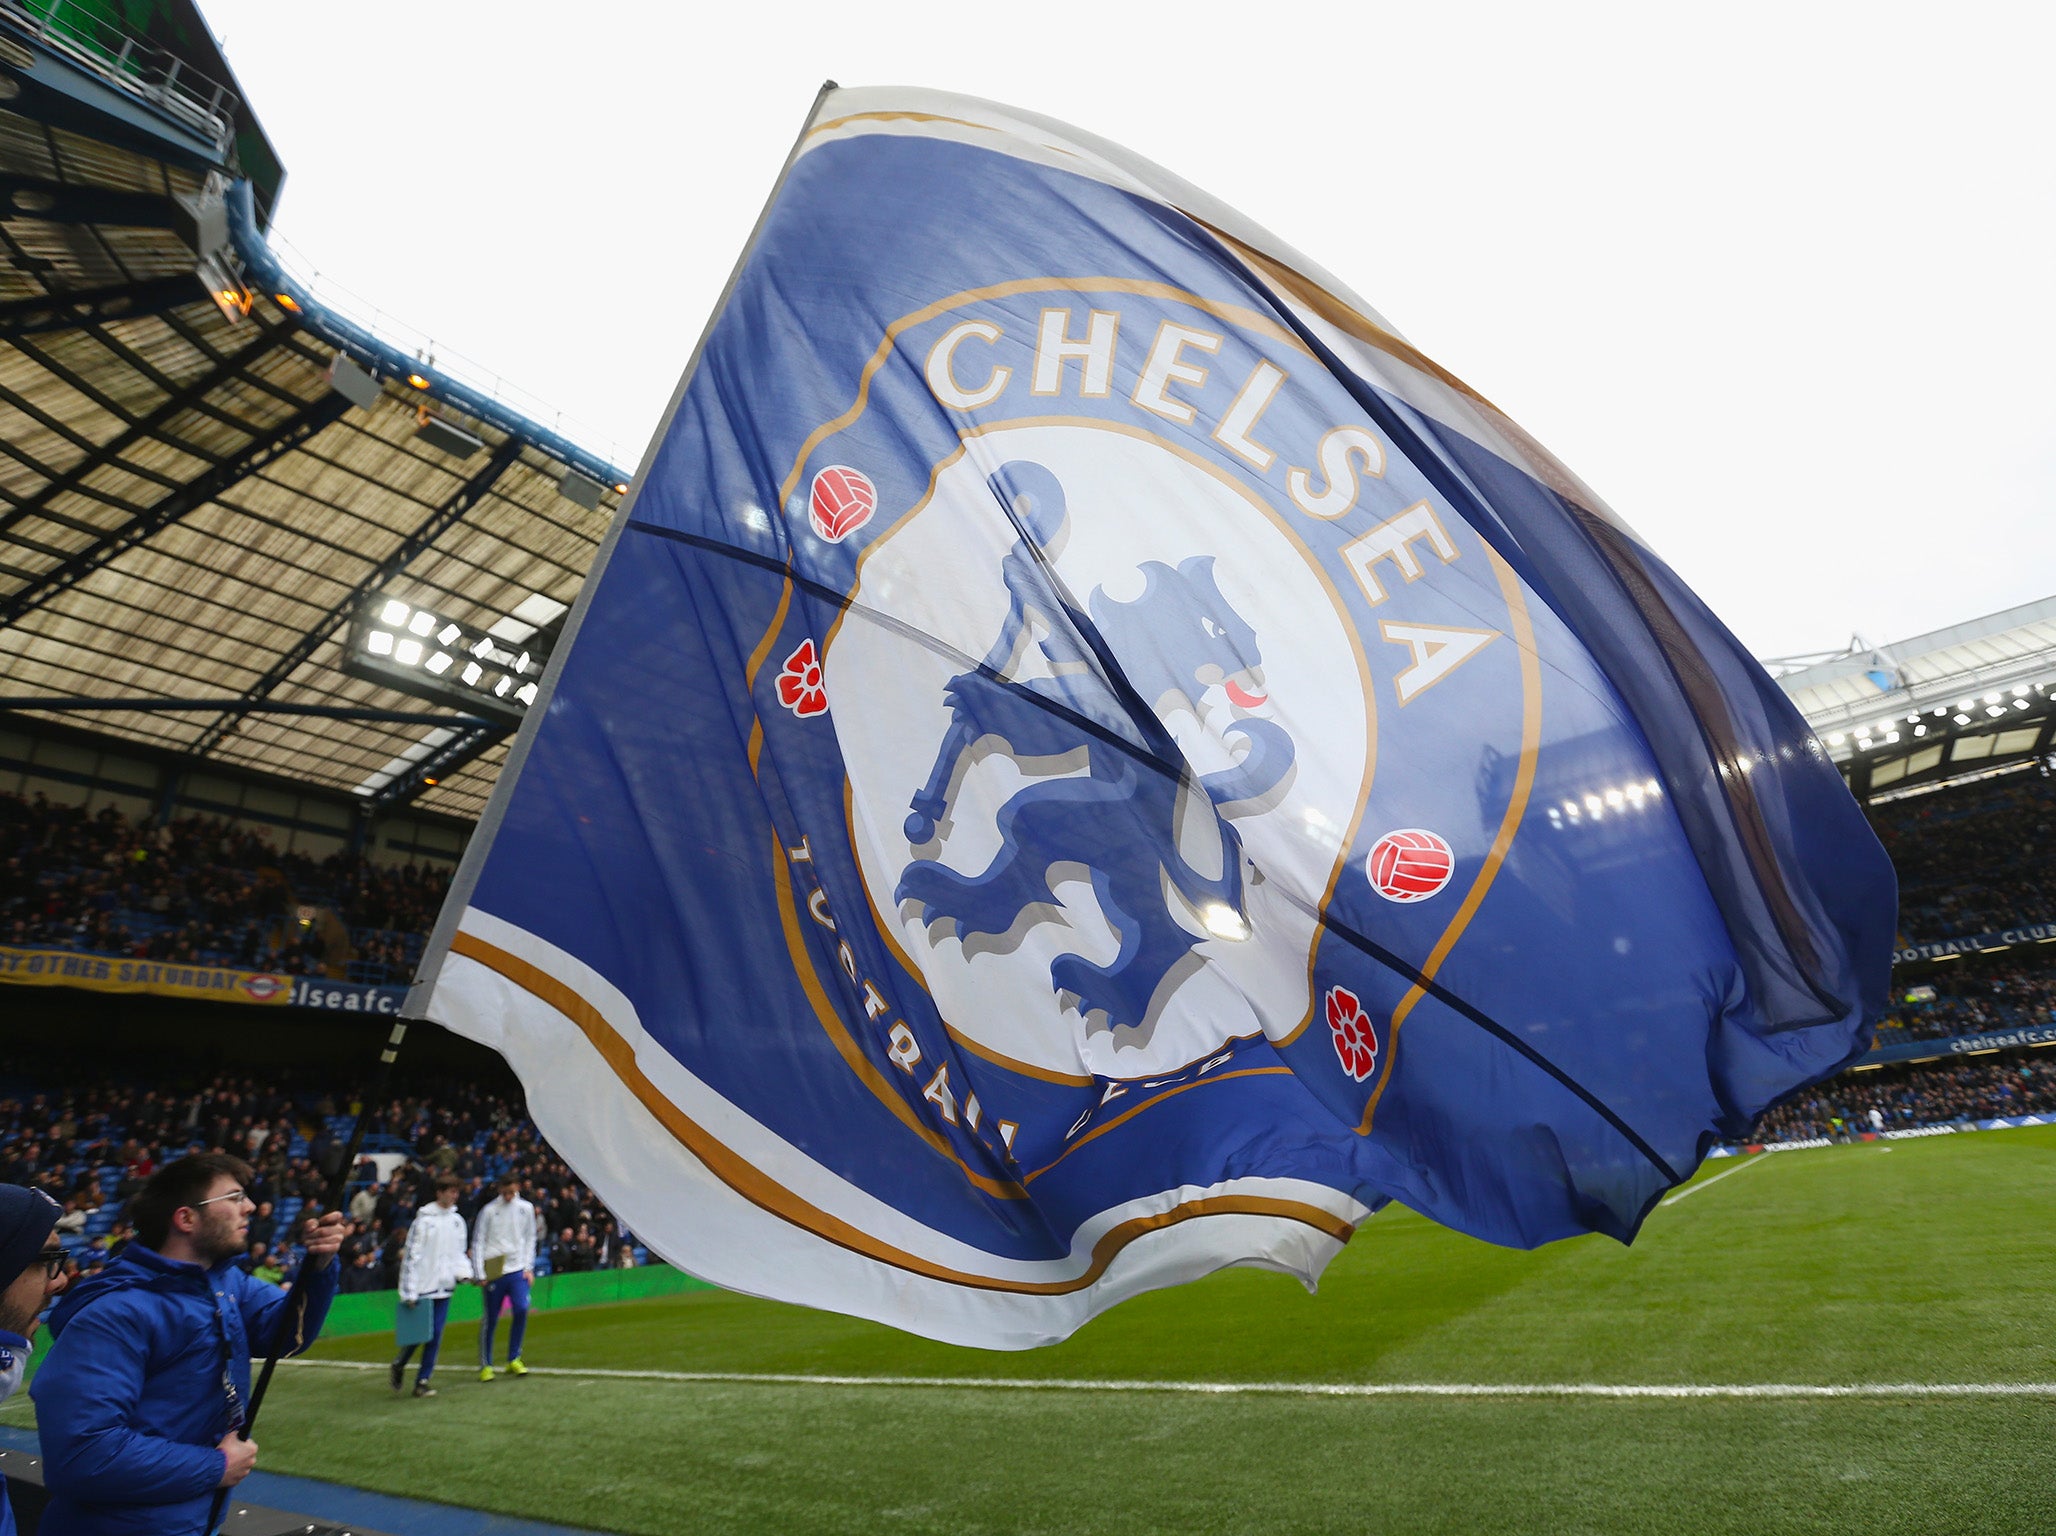 Chelsea have plans to turn Stamford Bridge into a 60,000-seater stadium